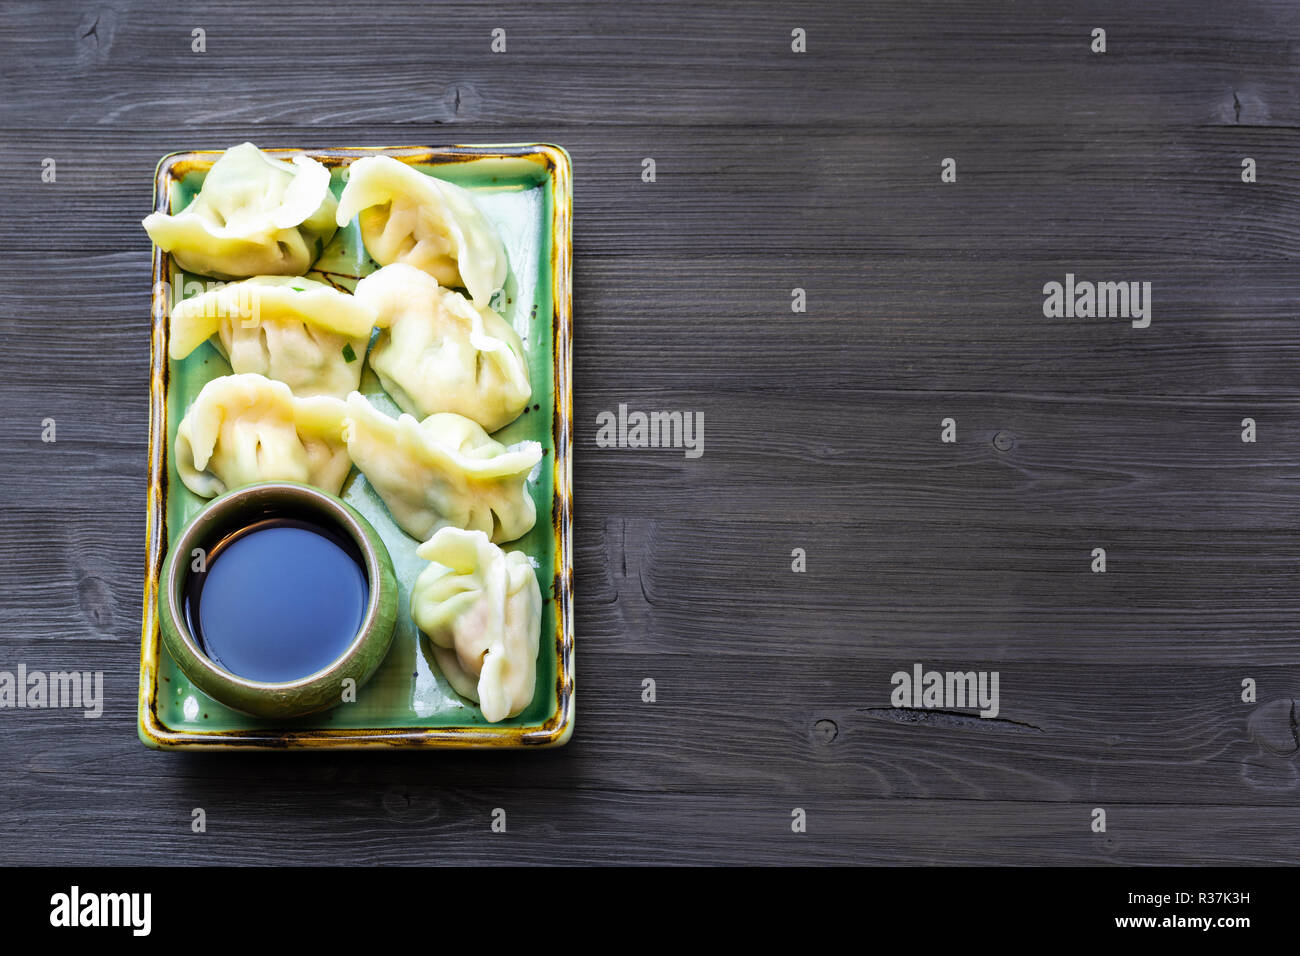 Chinese cuisine dish - served portion of Dumplings with three fillings (shrimp, egg, greens) on plate on dark wooden board with copyspace Stock Photo